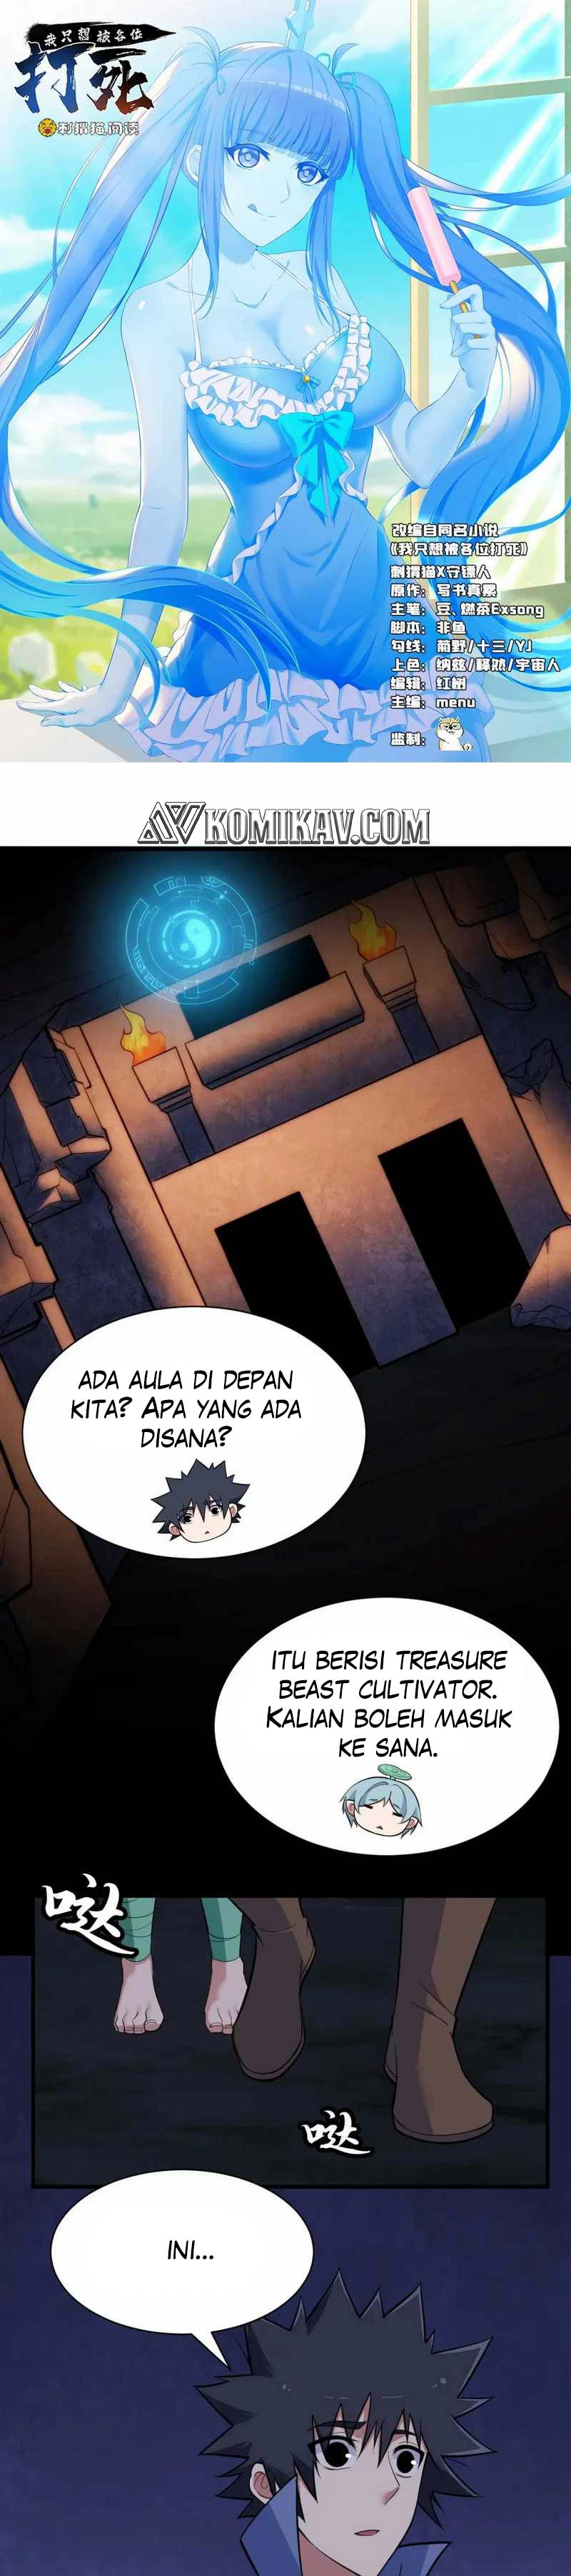 Dilarang COPAS - situs resmi www.mangacanblog.com - Komik i just want to be beaten to death by everyone 116 - chapter 116 117 Indonesia i just want to be beaten to death by everyone 116 - chapter 116 Terbaru 1|Baca Manga Komik Indonesia|Mangacan